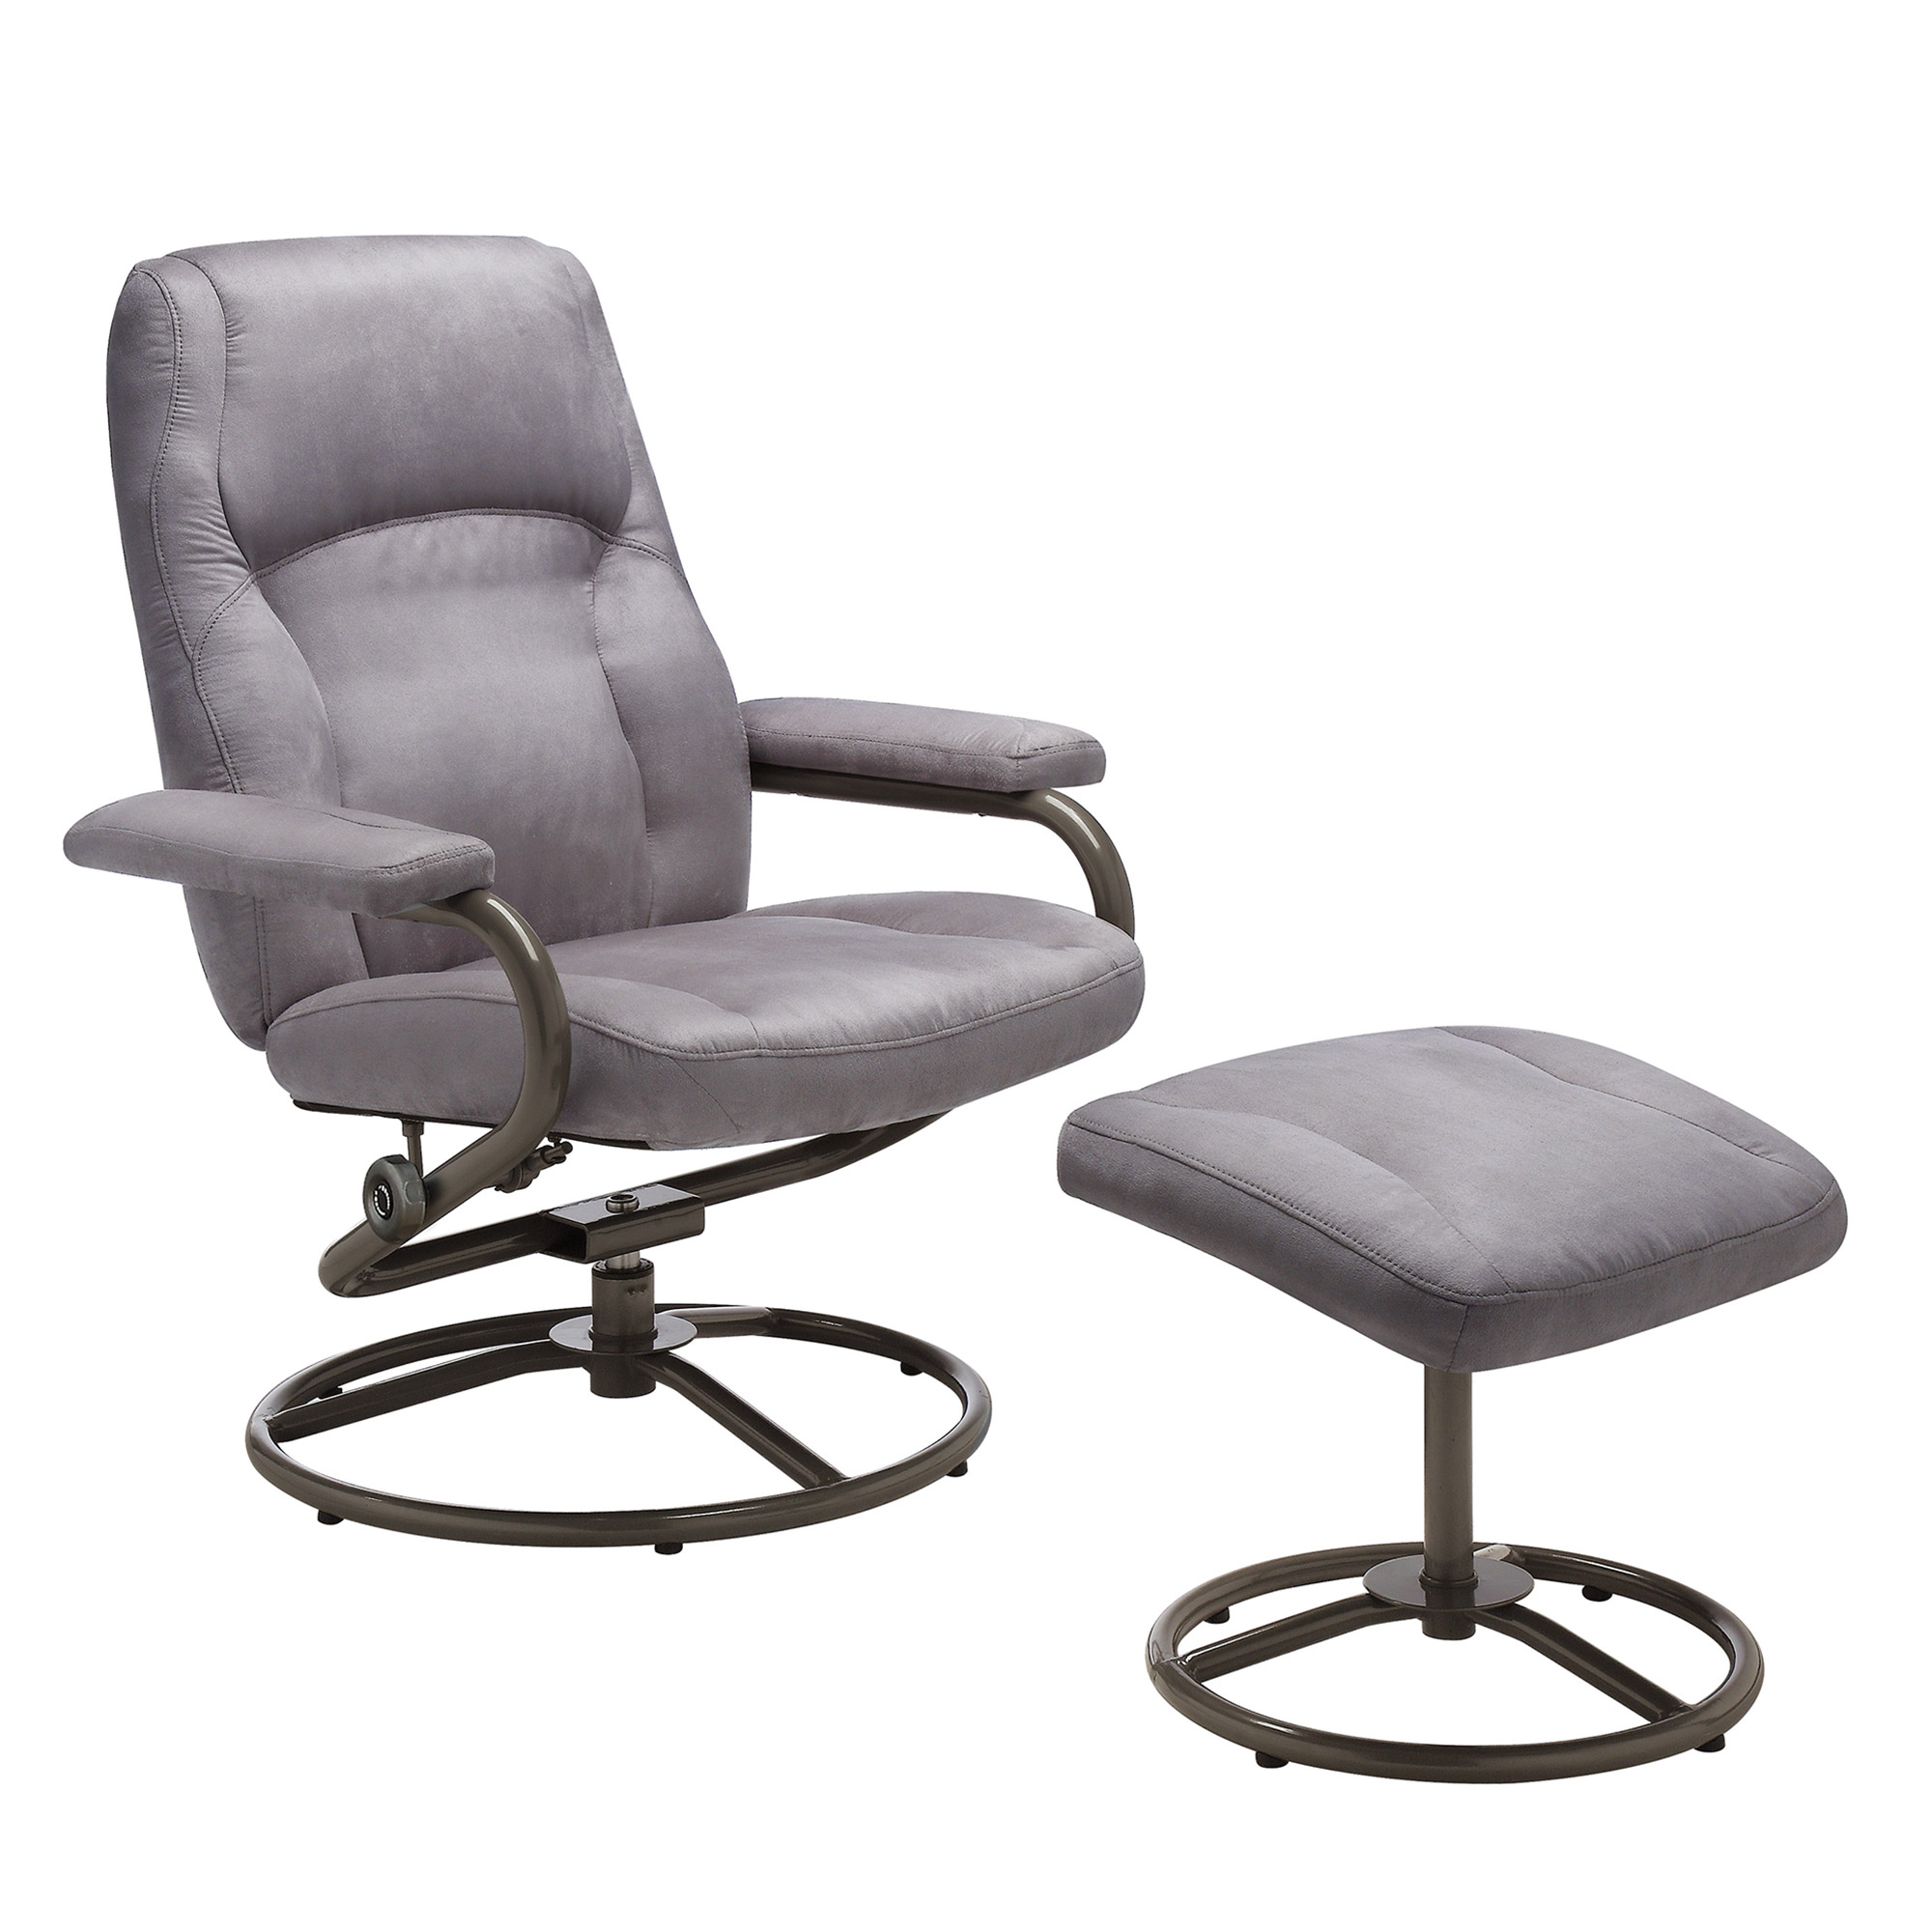 Mainstays Plush Pillowed Recliner Swivel Chair and Ottoman Set, in Gray - image 3 of 4